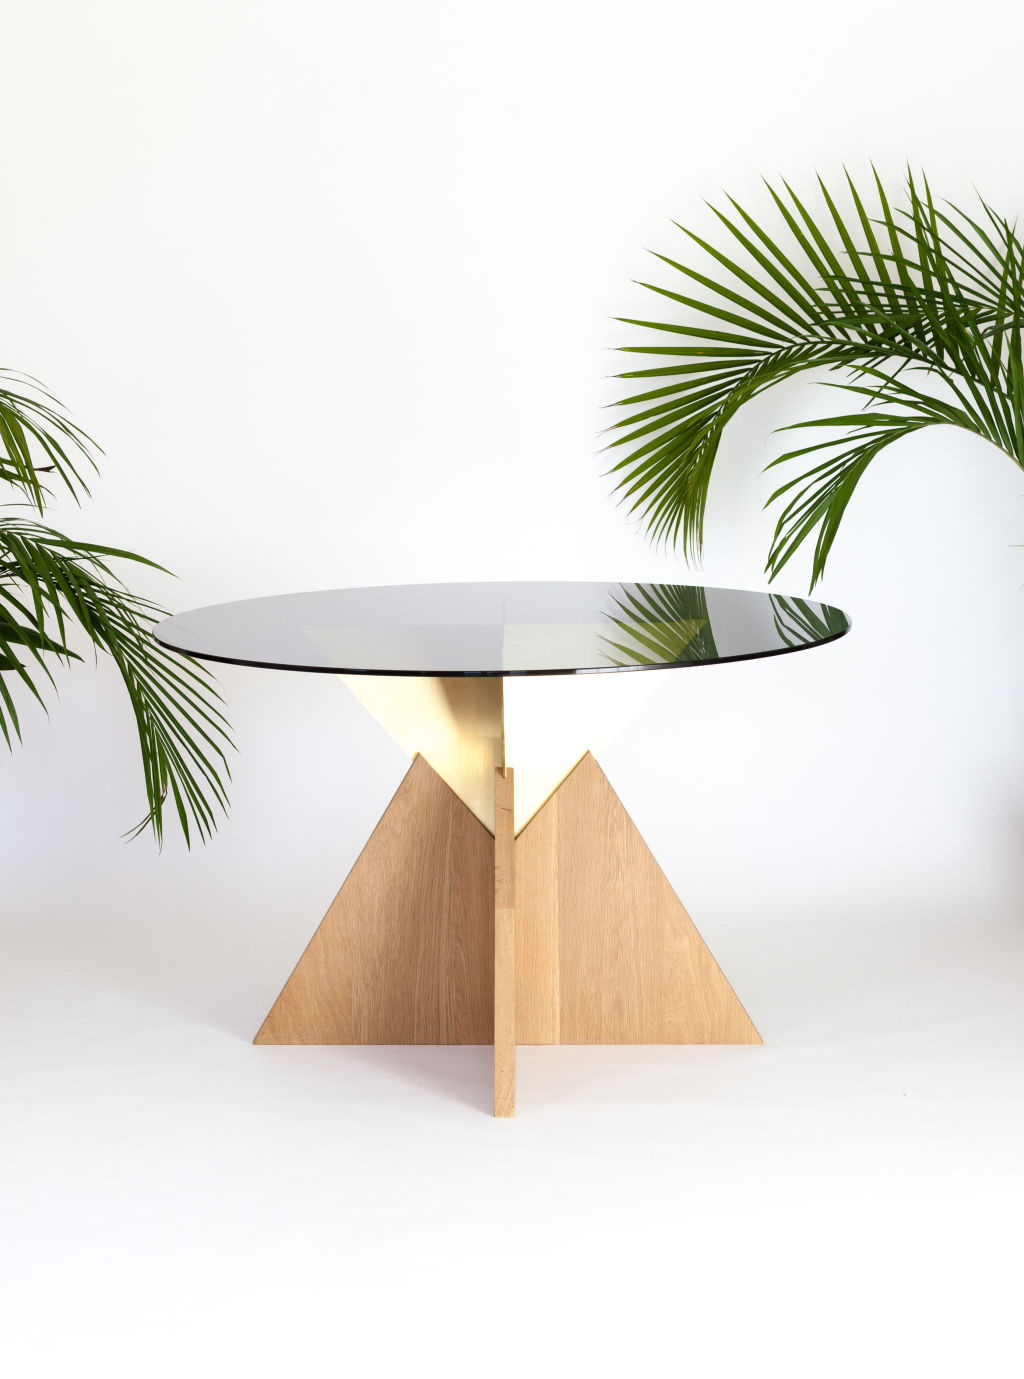 Shapes dining table by Rosanna Ceravolo. Photo: Supplied